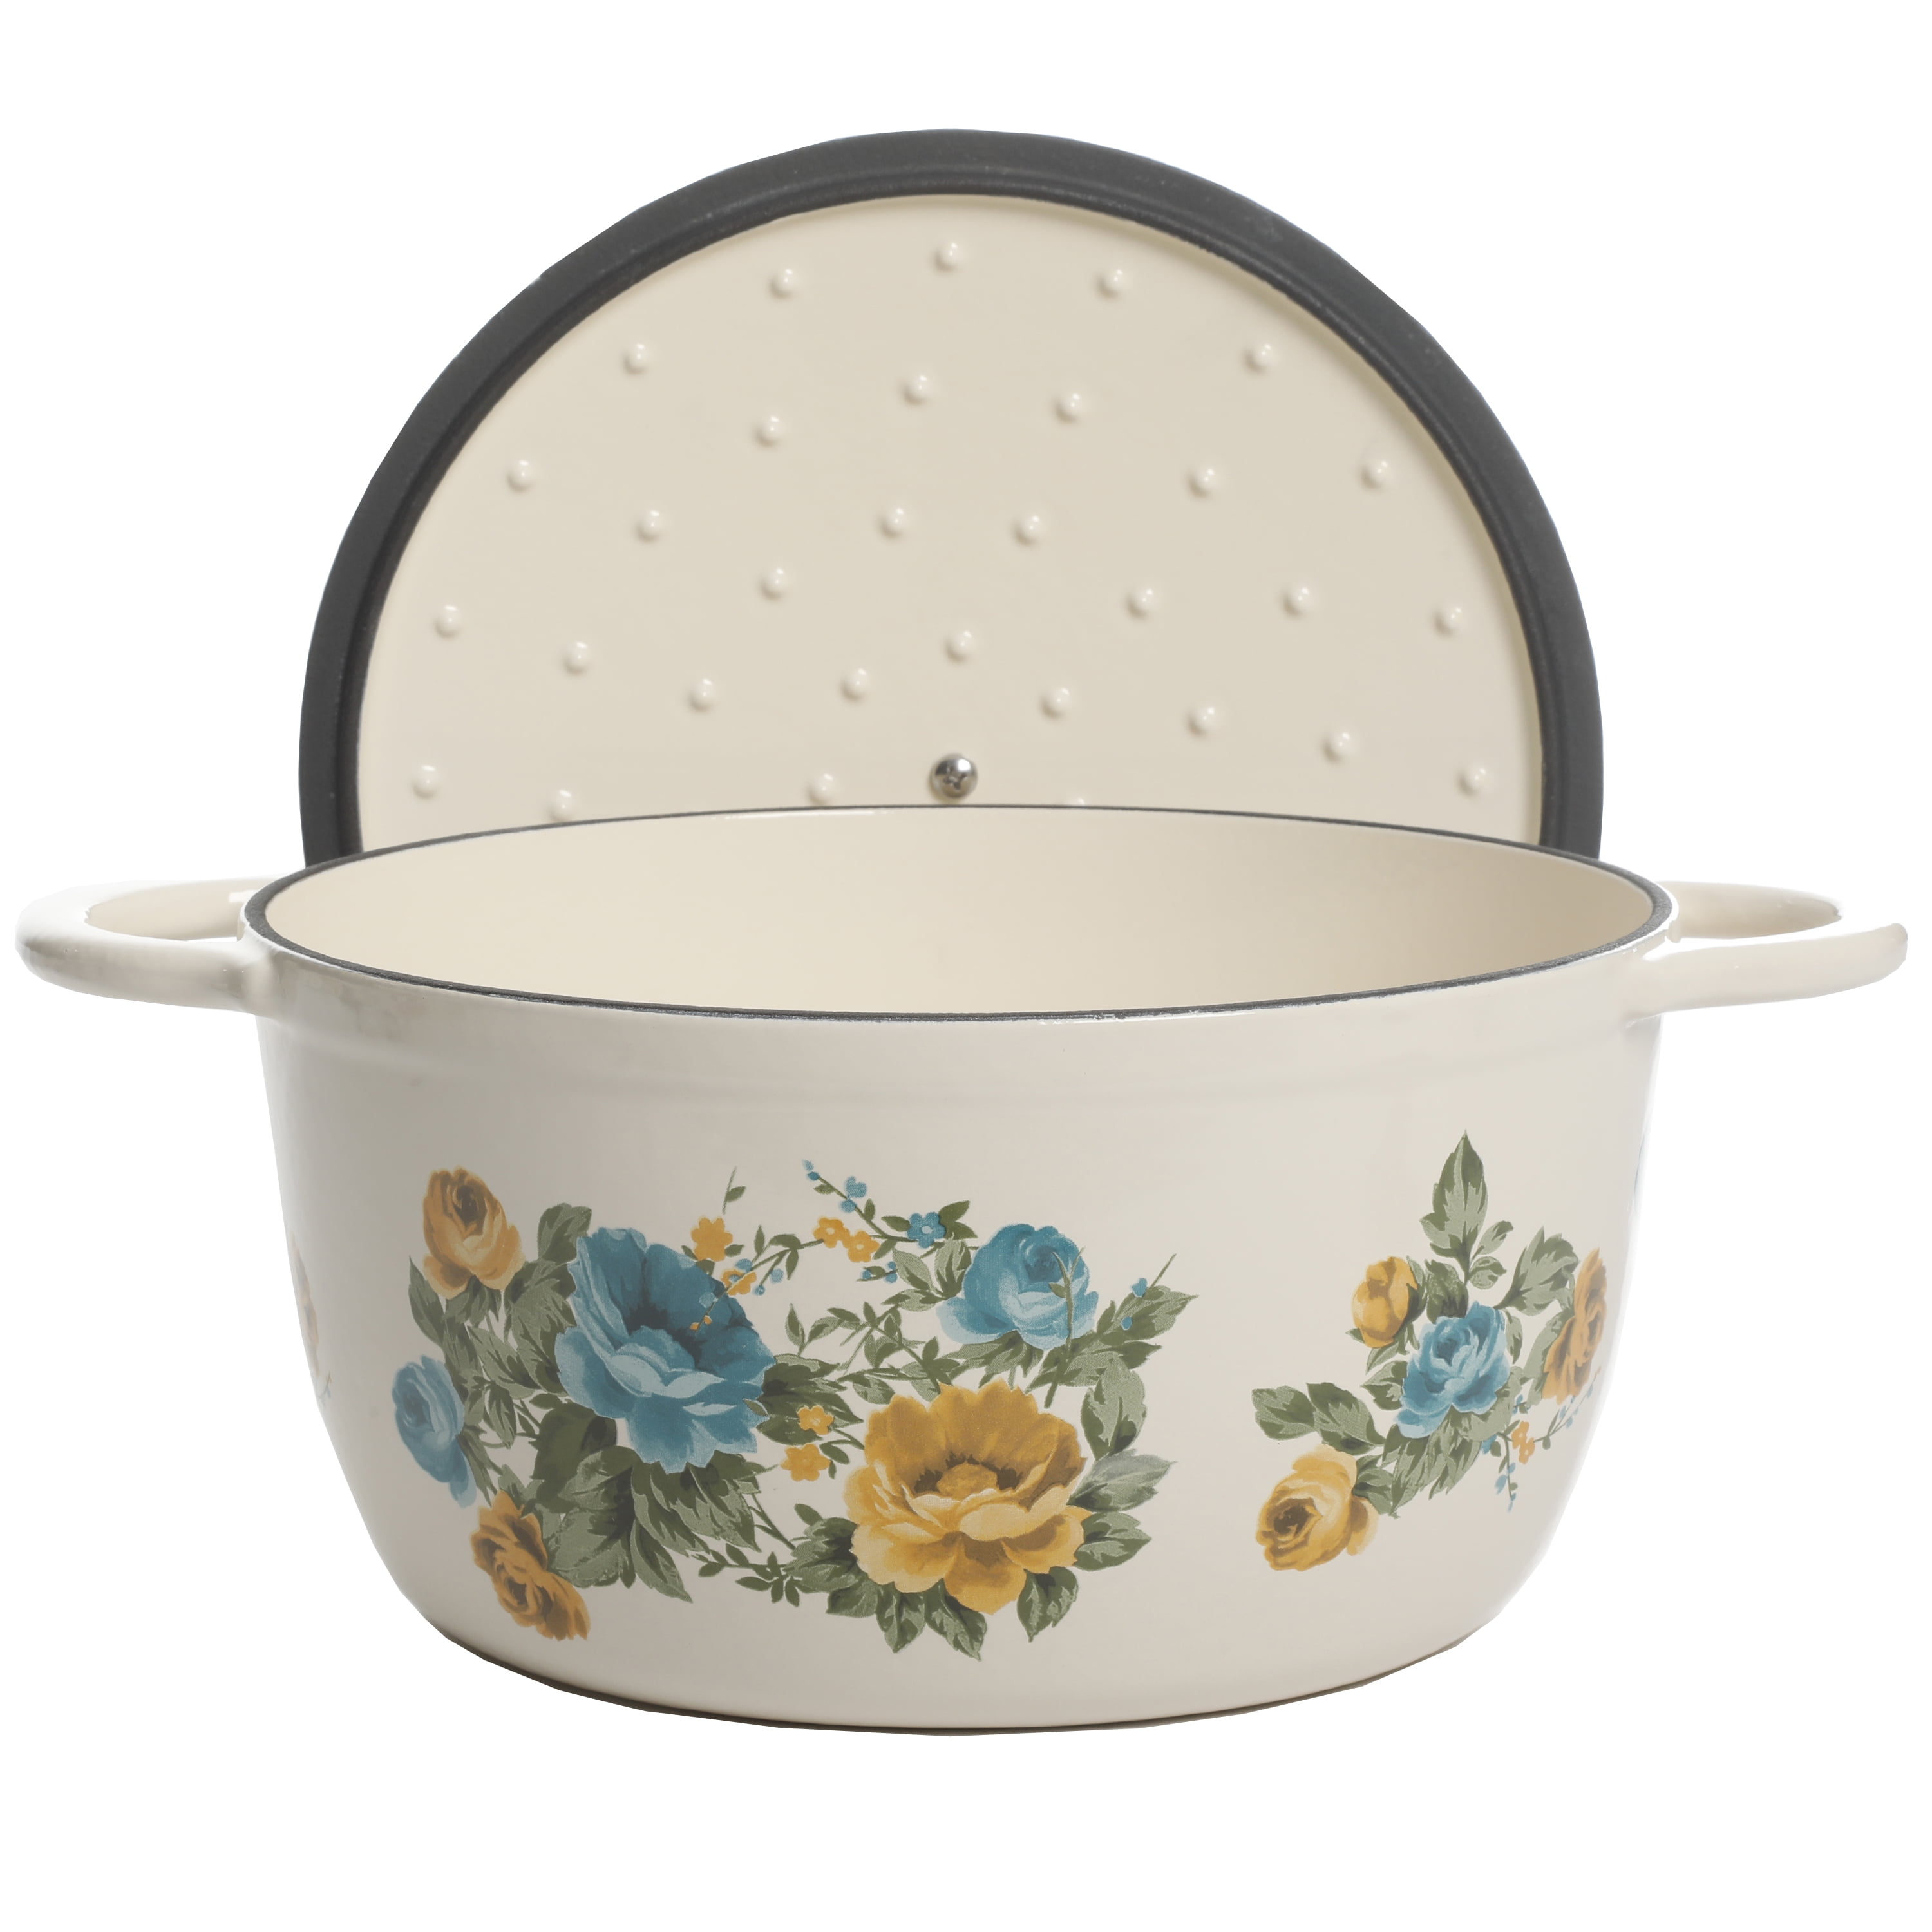 The Pioneer Woman Rose Shadow 5-Quart Dutch Oven - 1